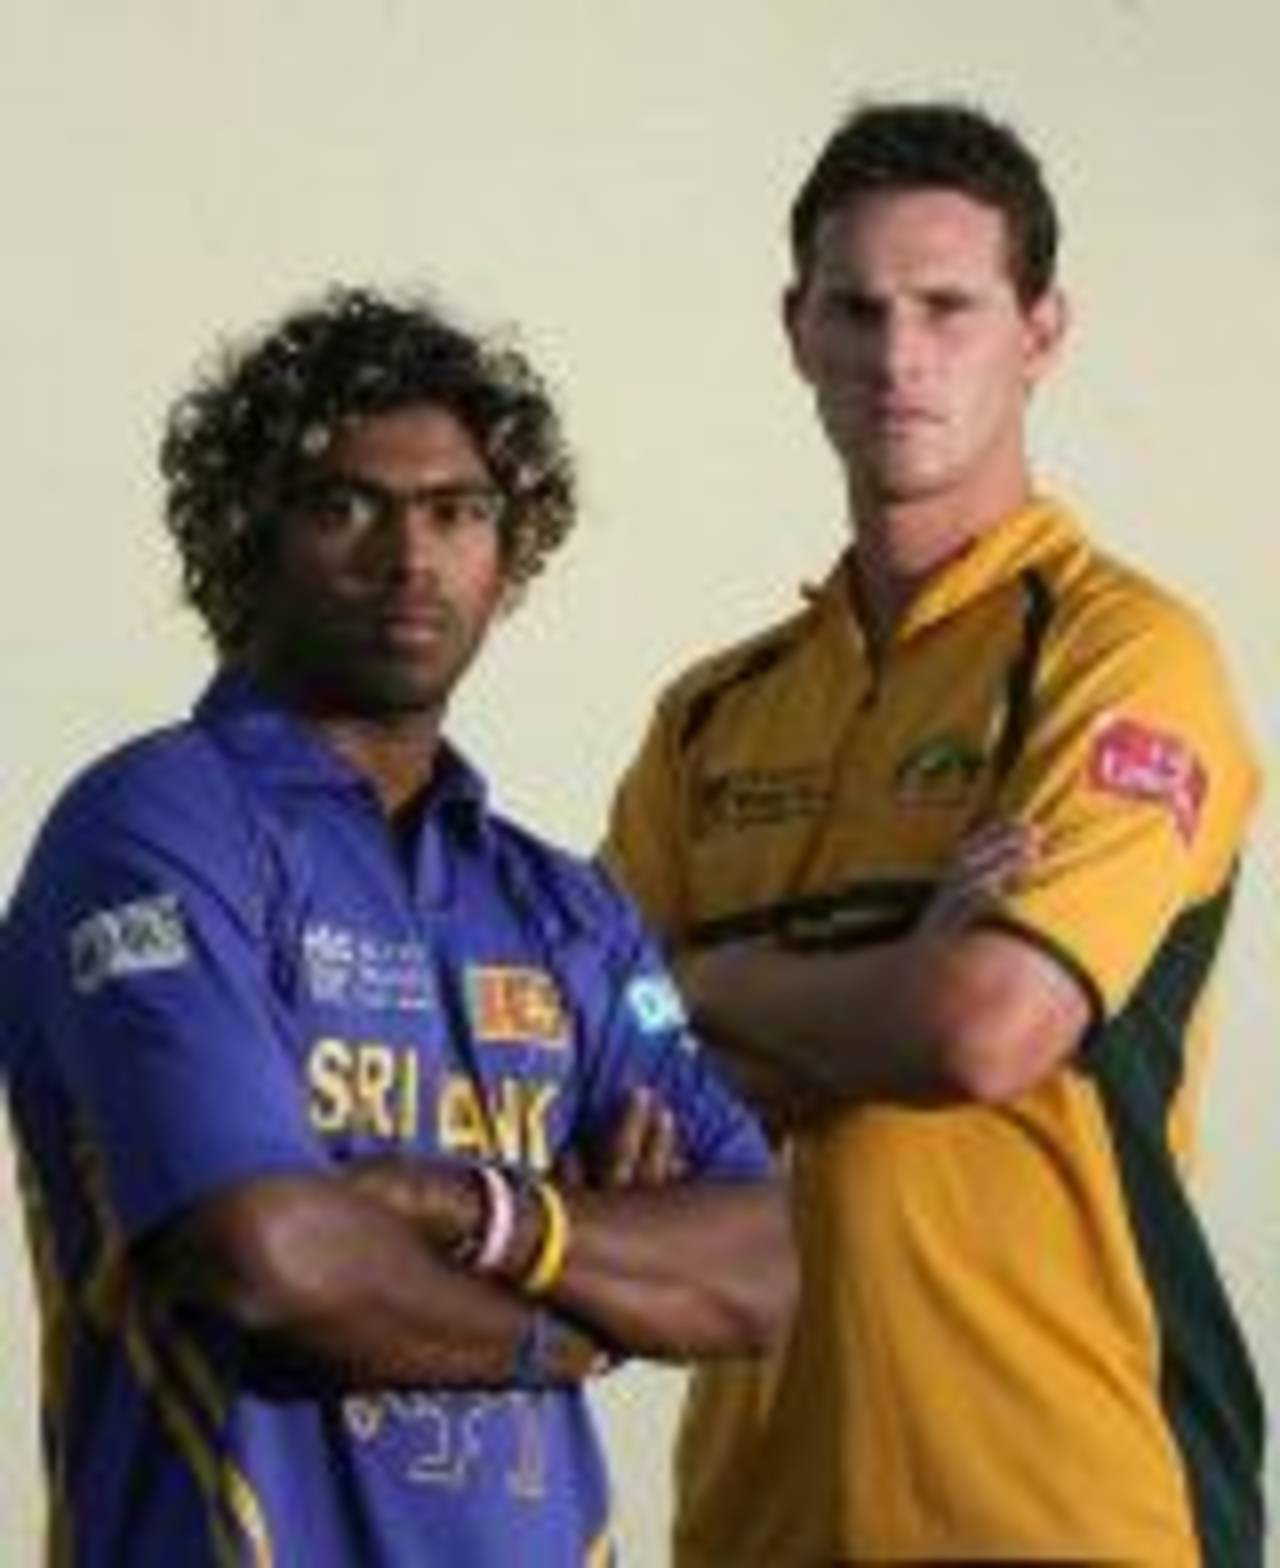 Meeting of the slingers: Lasith Malinga and Shaun Tait, St George's, Grenada, April 15, 2007